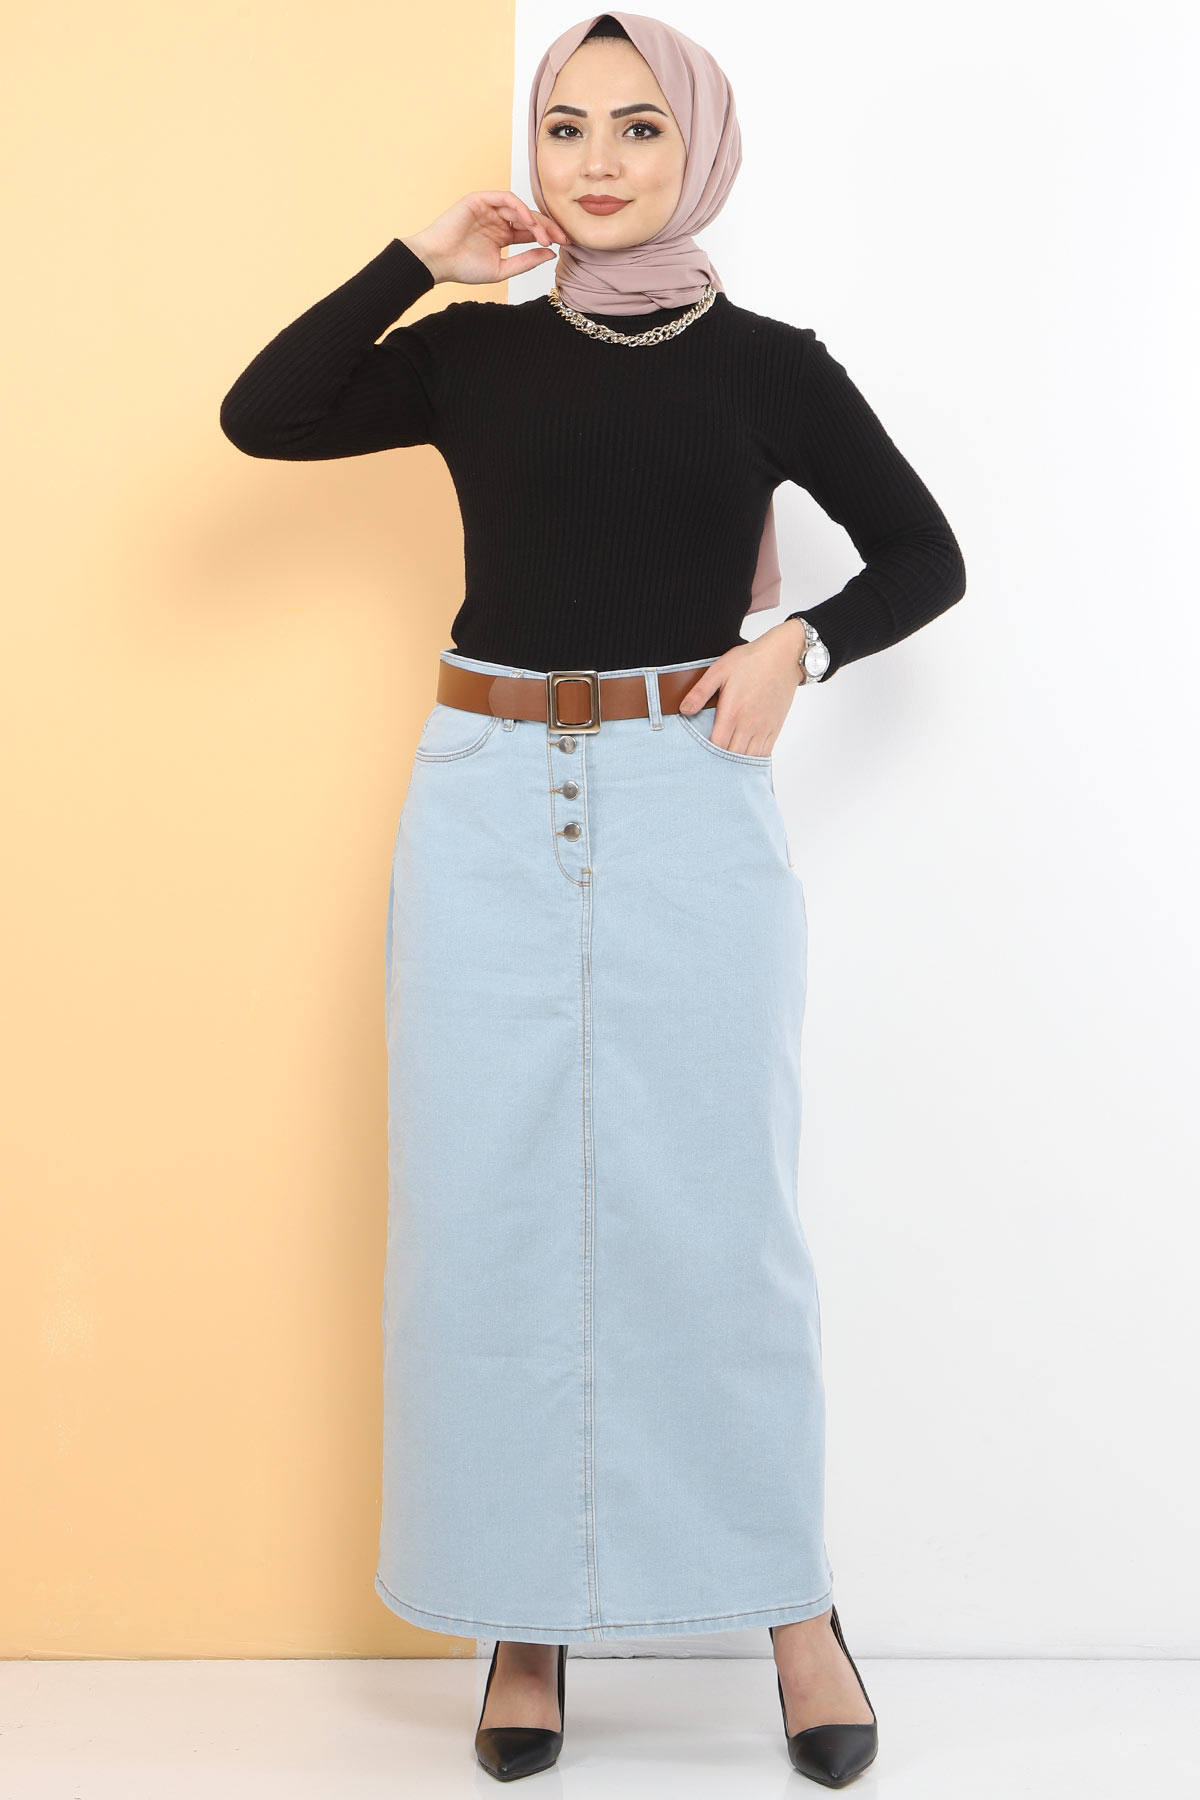 Arched Jeans Skirt TSD231015 Light blue